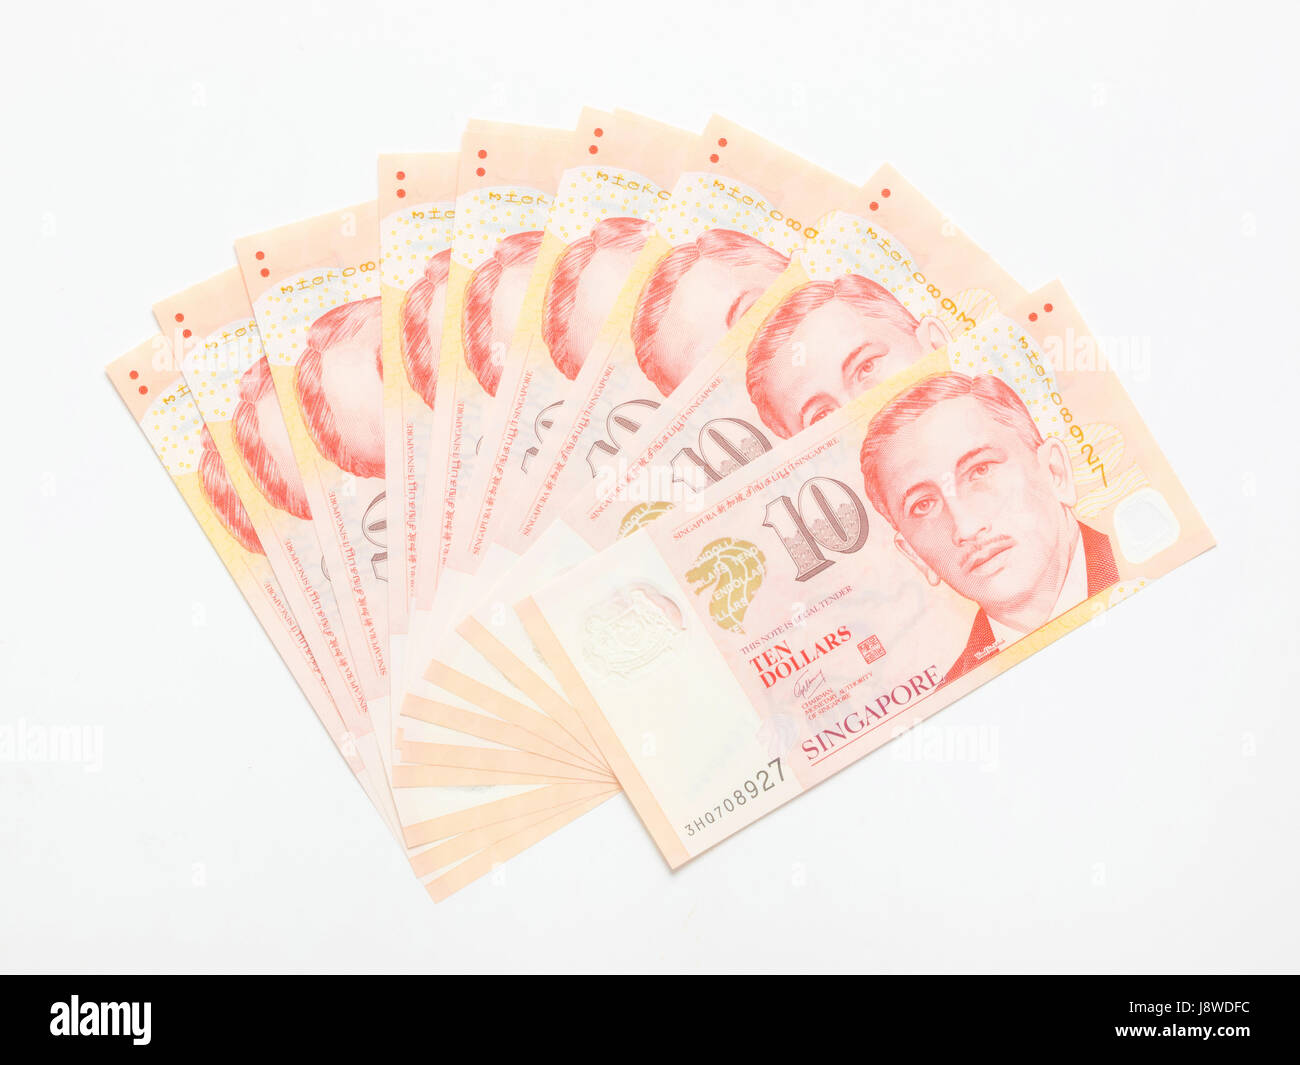 $10000 SGD note & bill_10000 S$ Samples's Pictures,Photos,Images